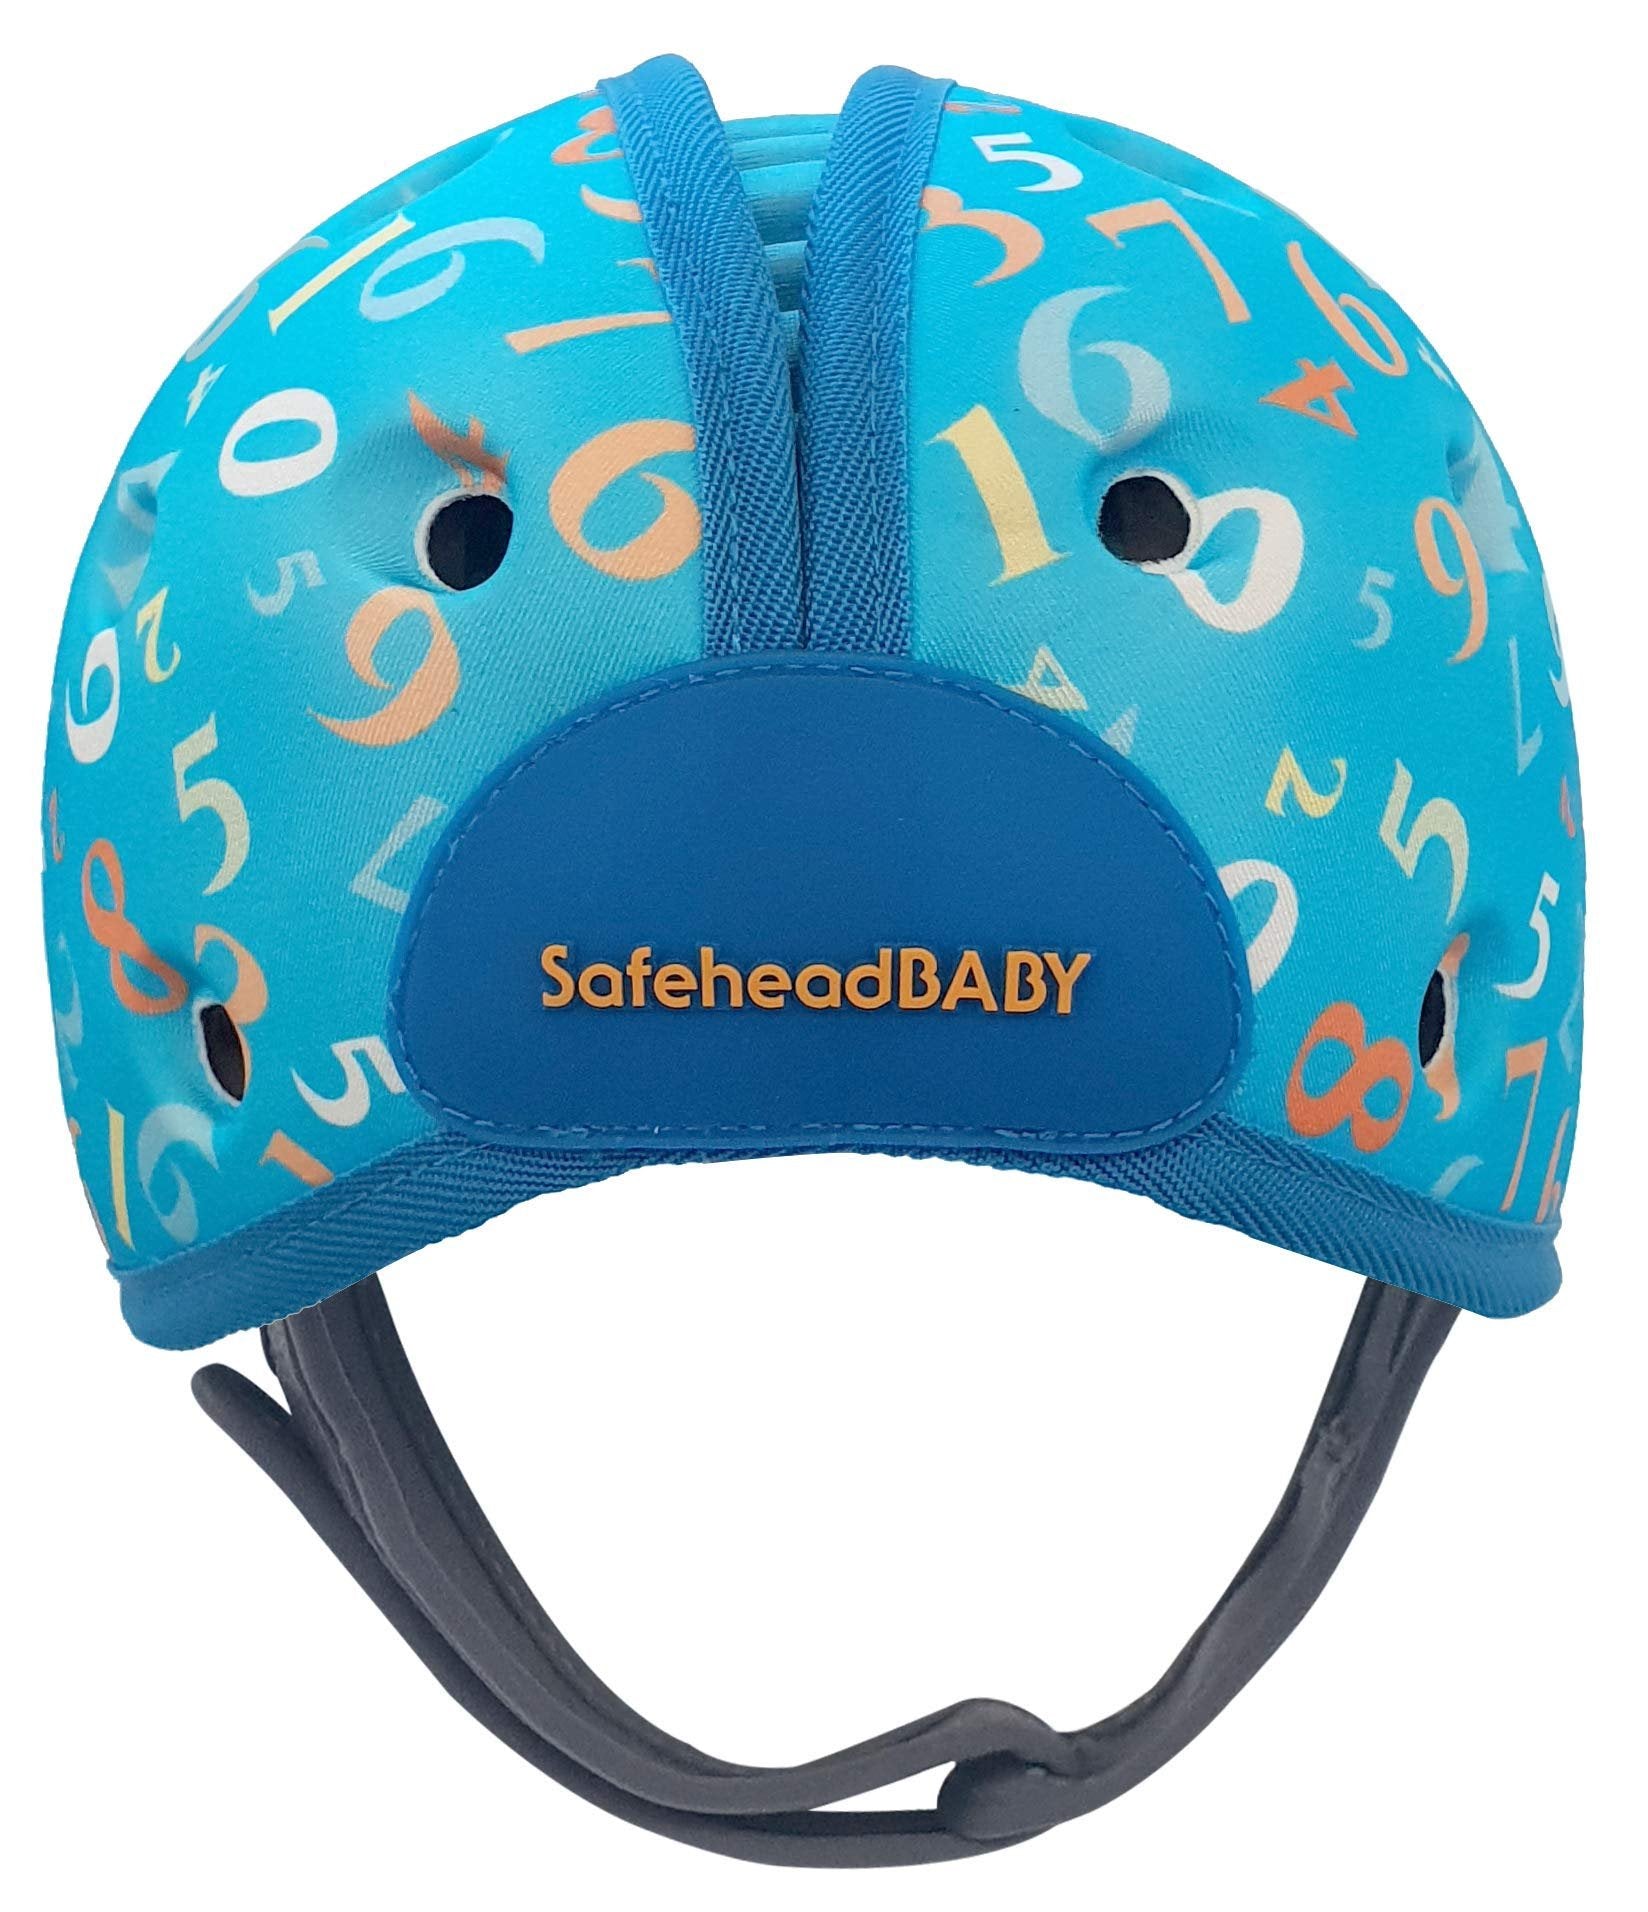 SafeheadBABY Infant Safety Helmet Toddler Head Protection UL-Lightweight - One Size - Numbers Blue